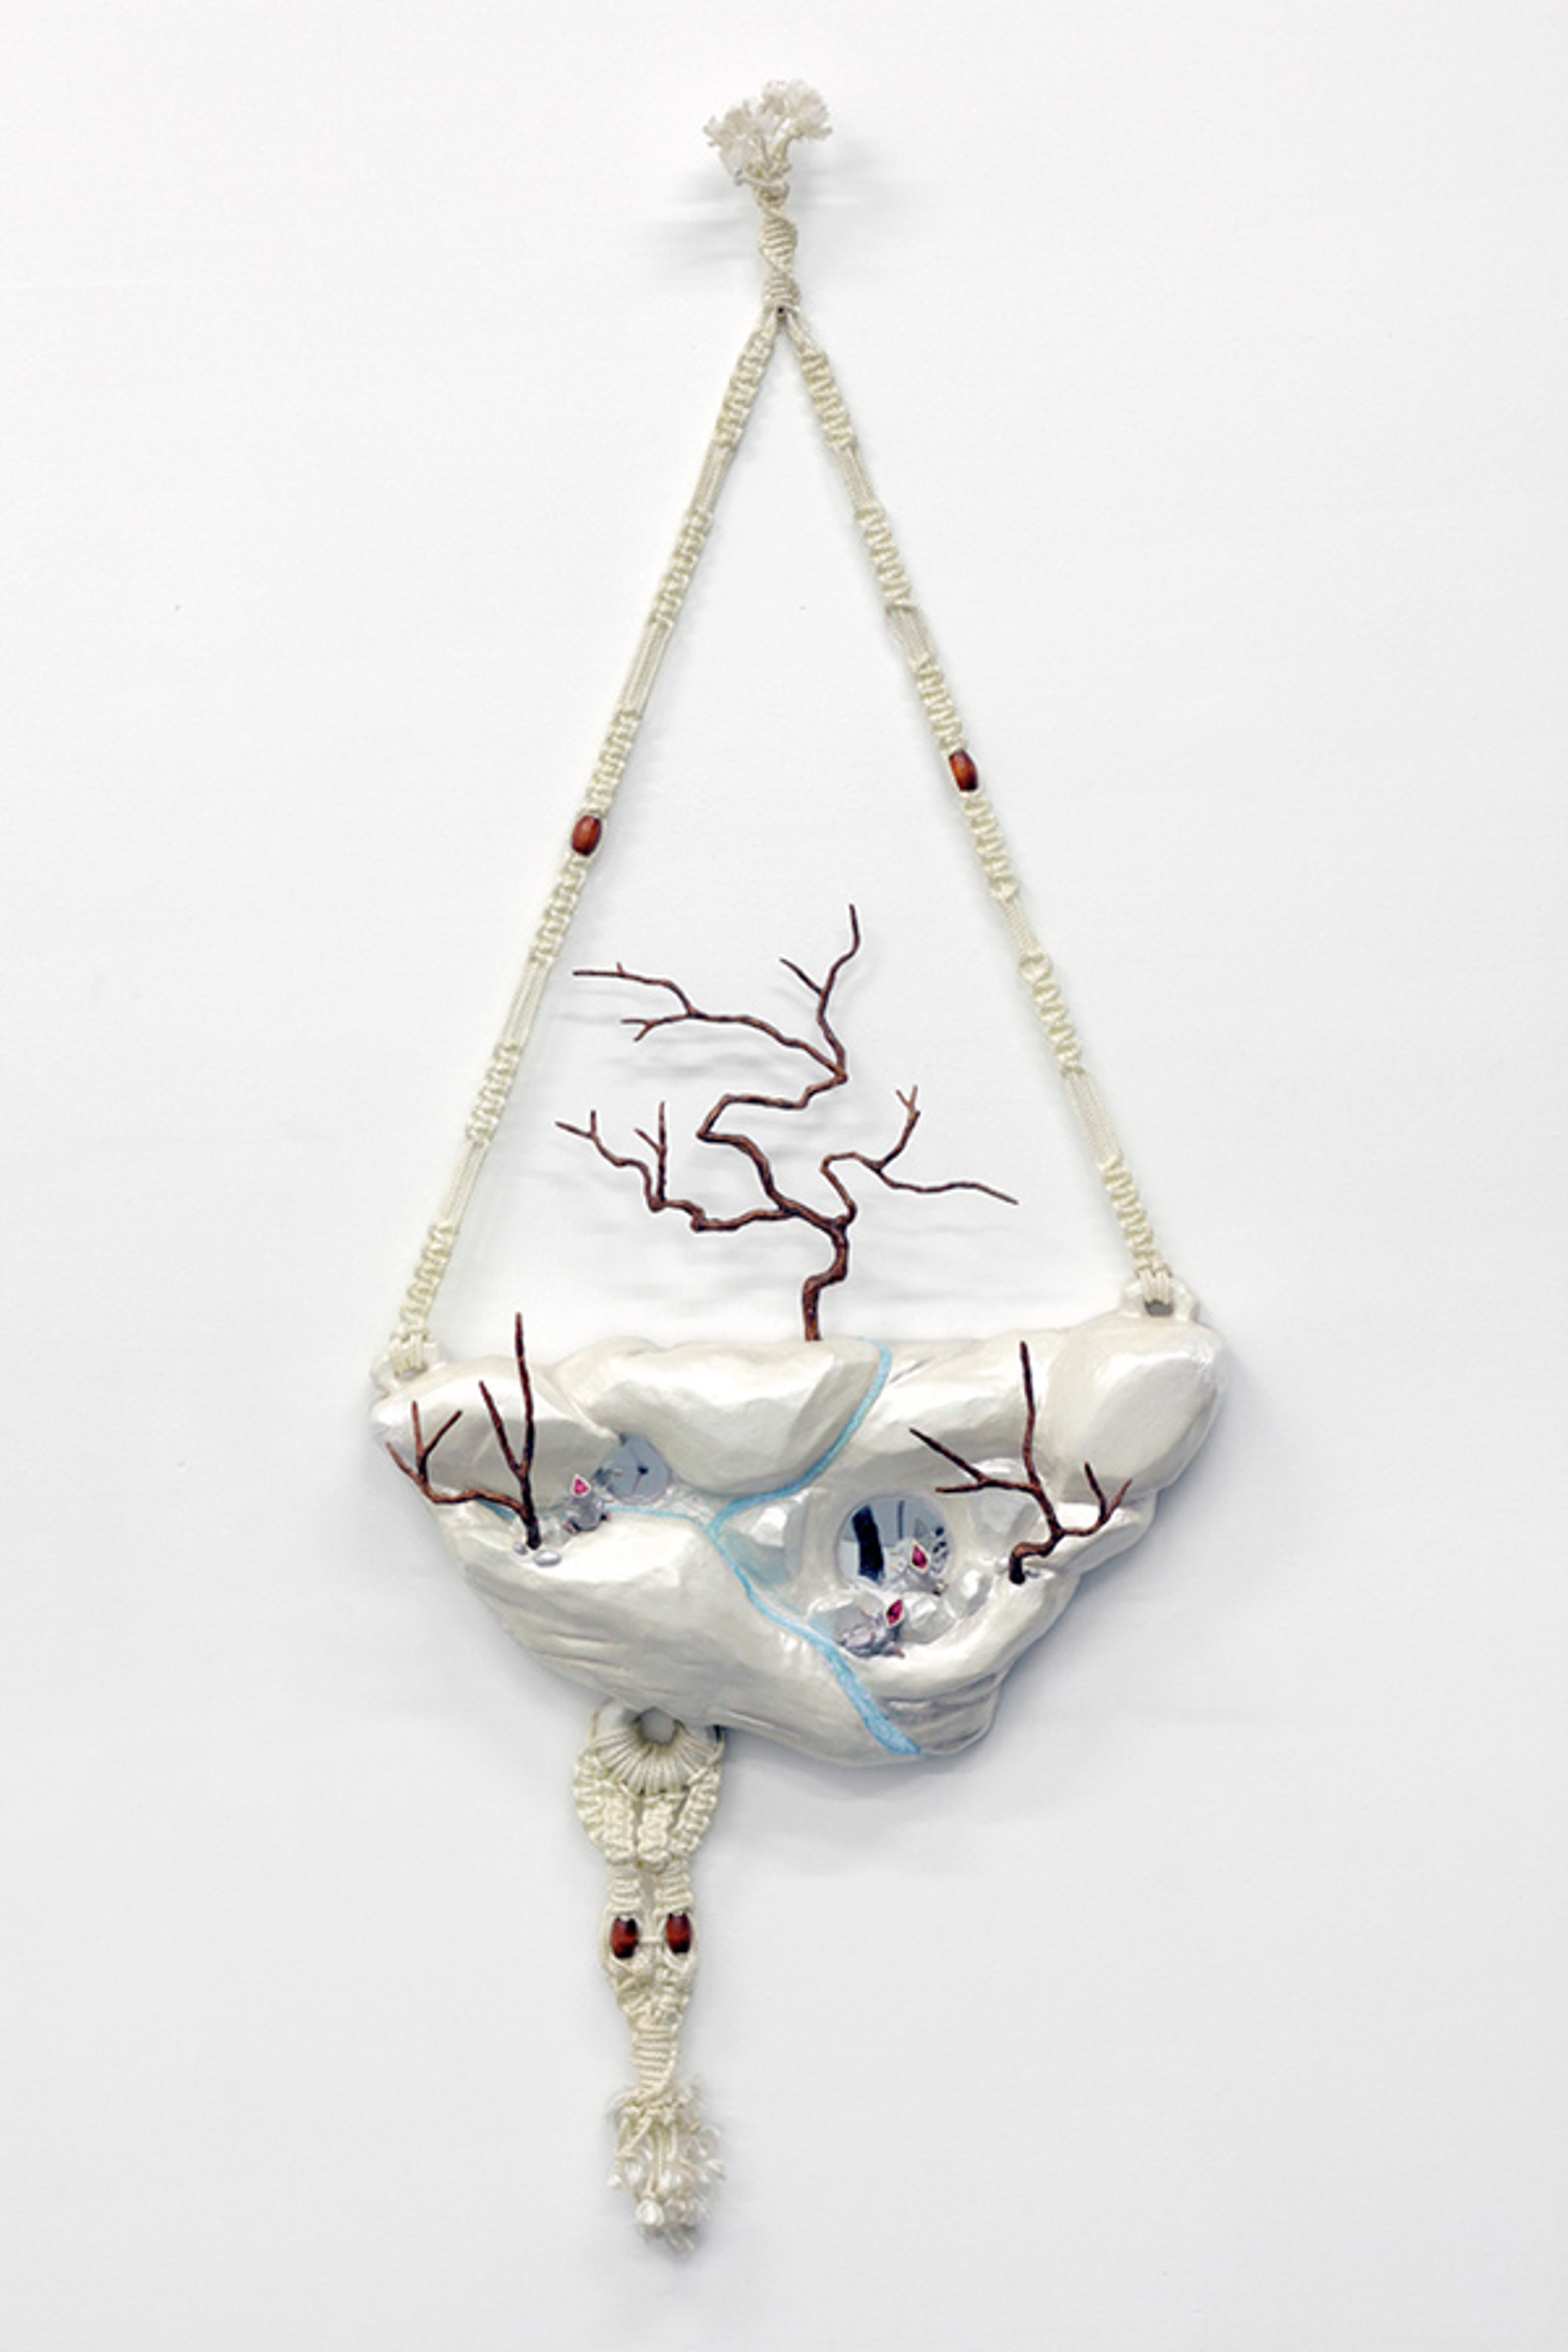 Mindy Rose Schwartz, After Falling Out of Their Nest, Baby Birds Land on the Face of a Cliff. Weary and Confused, Their Lives Hang in the Balance (2005). Wood, foam, plaster, wire, nylon cord, iridescent pain.